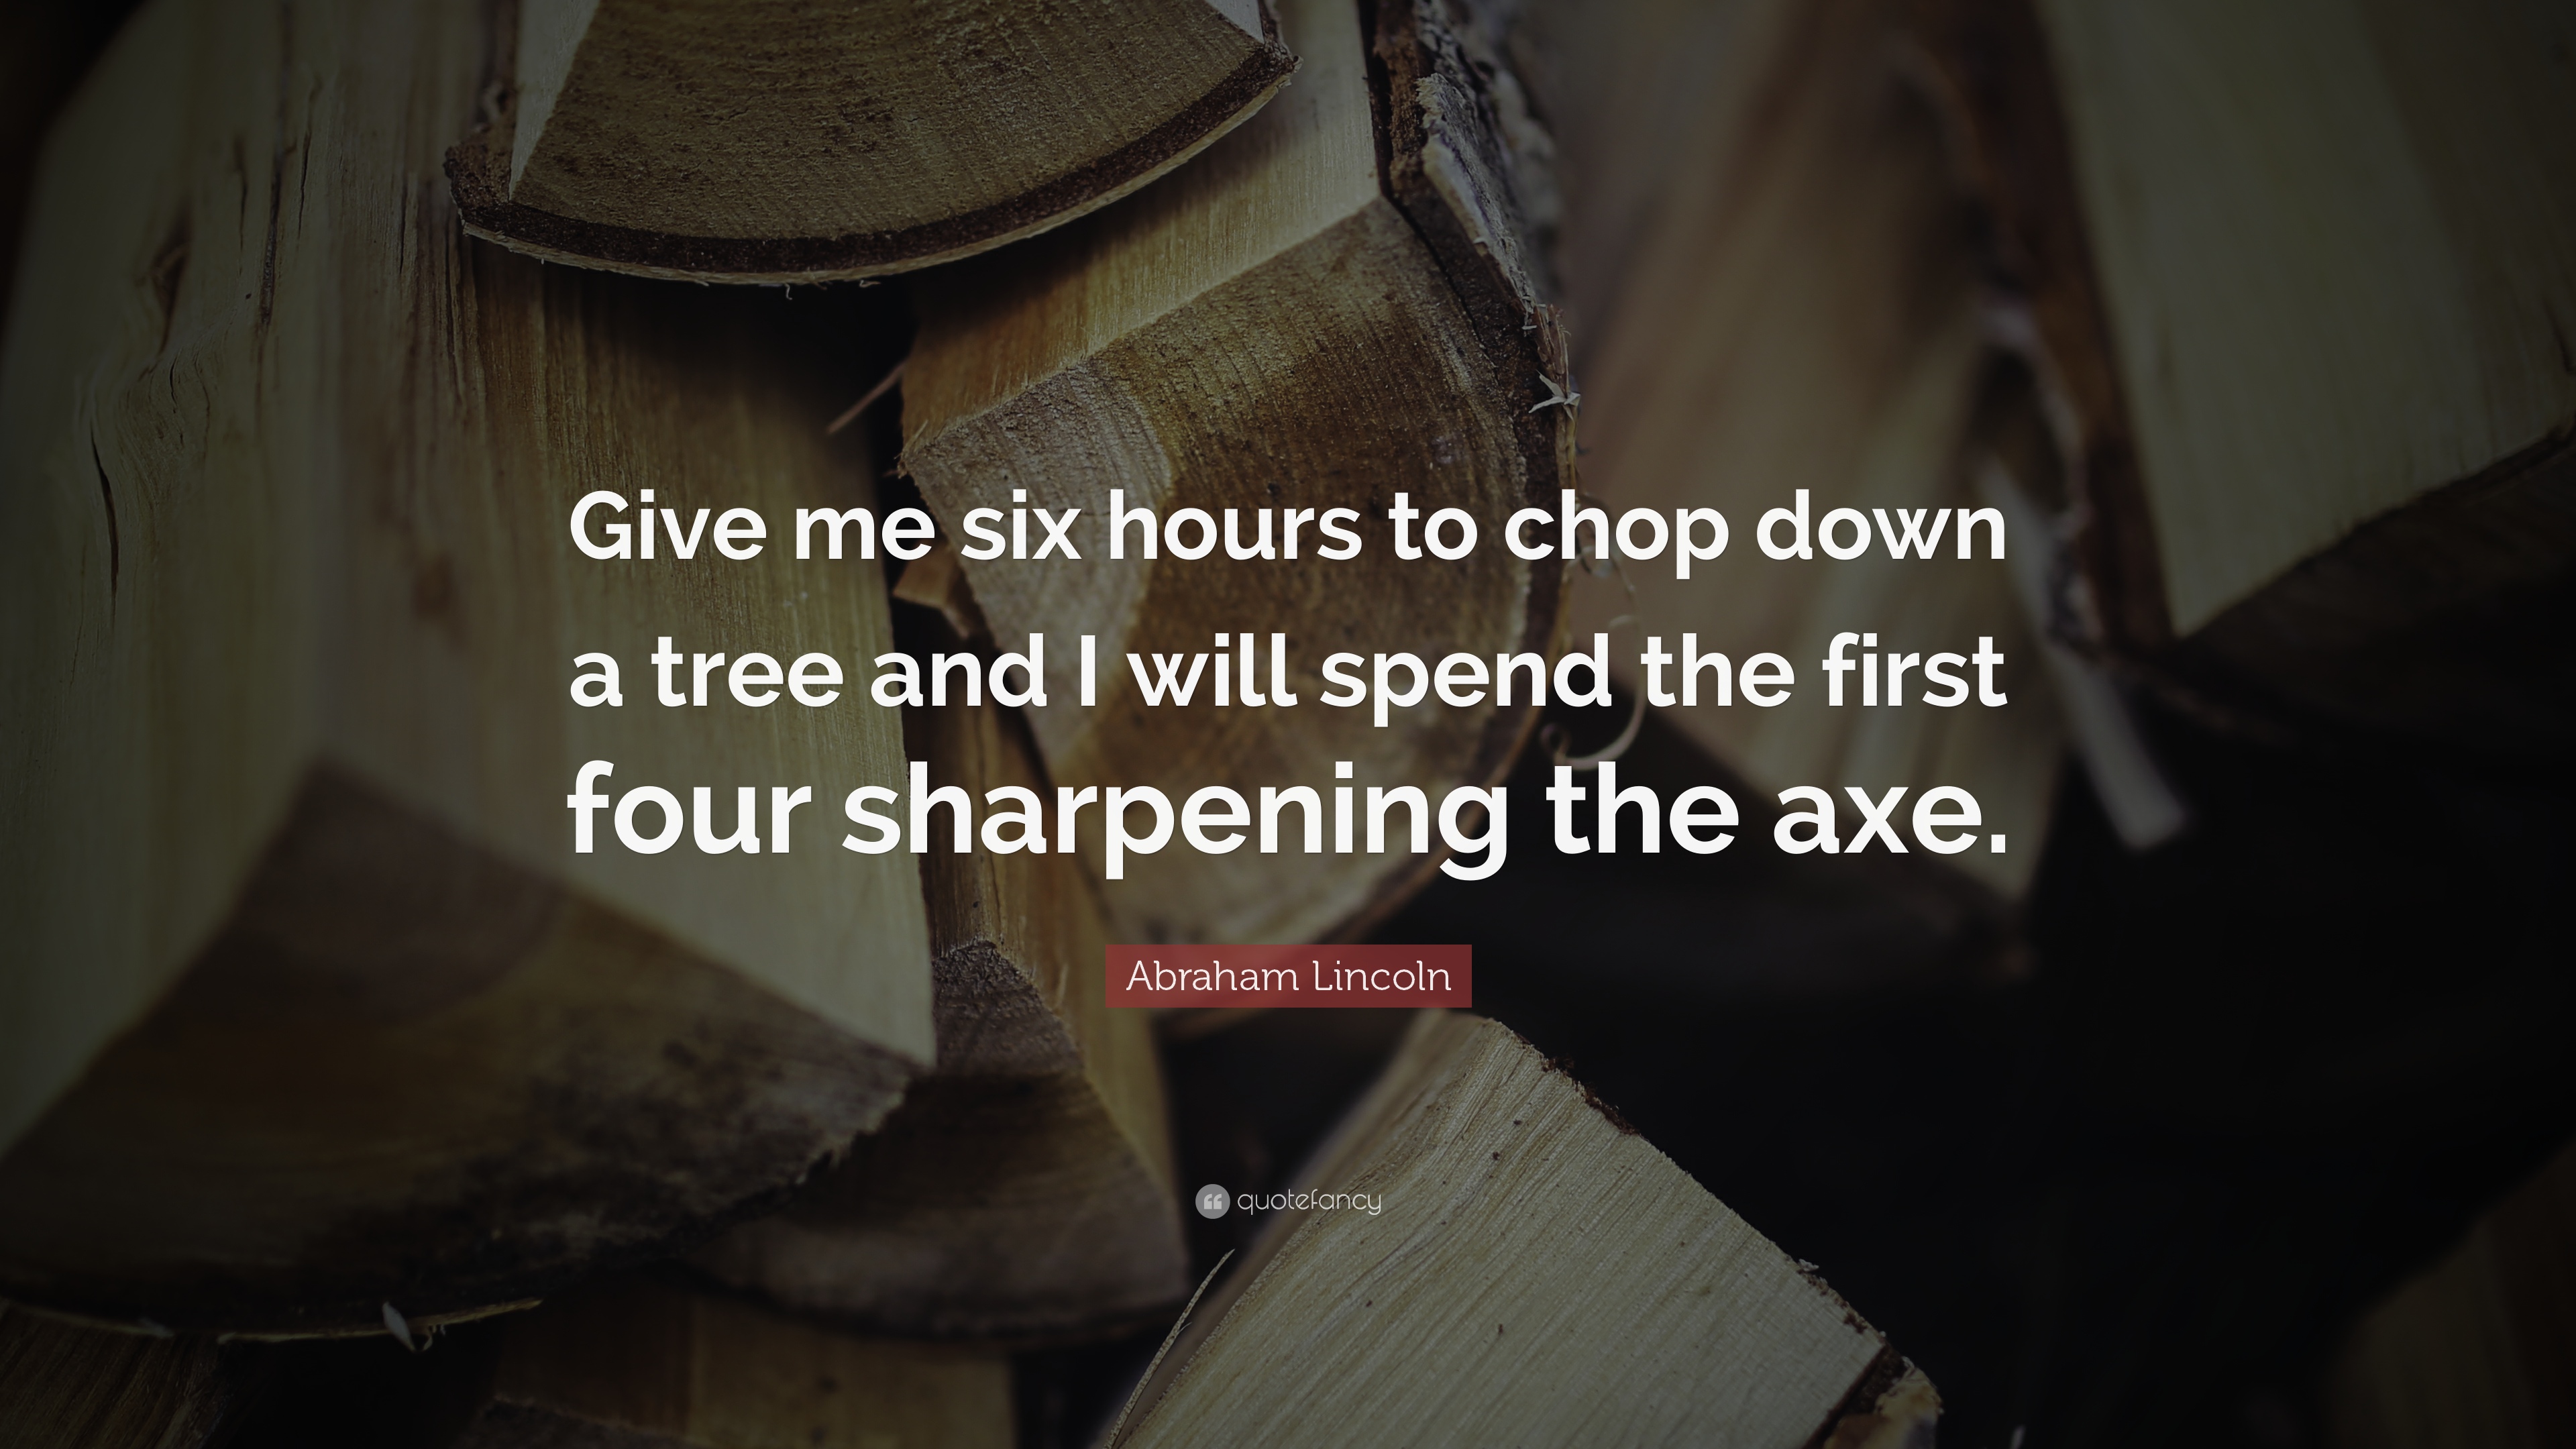 Abraham Lincoln Quote - Give Me Six Hours To Chop Down A Tree And I Will Spend - HD Wallpaper 